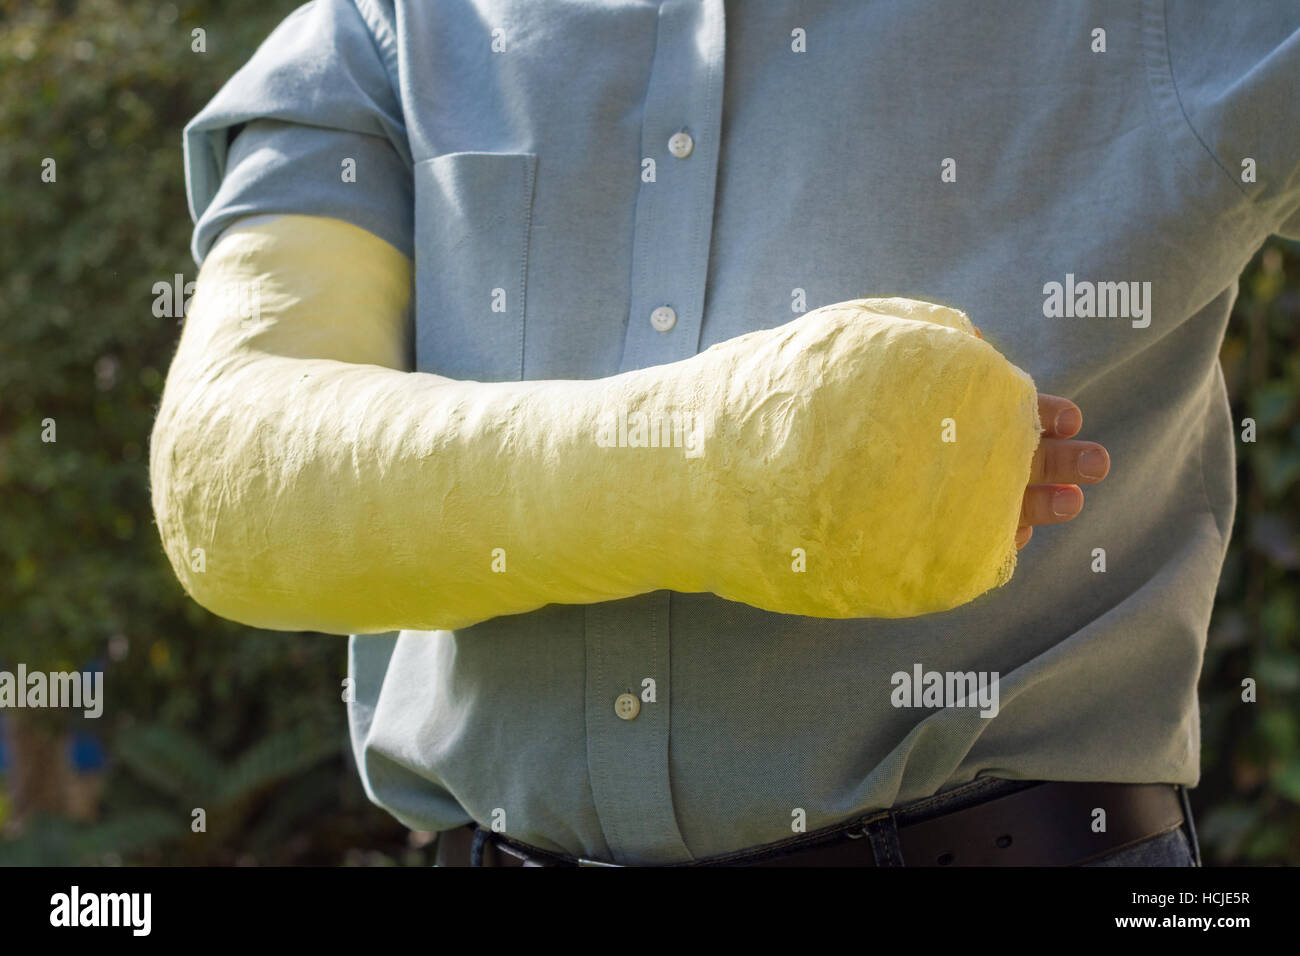 An arm and elbow in a yellow plaster / fiberglass cast worn by a young man standing in a garden Stock Photo